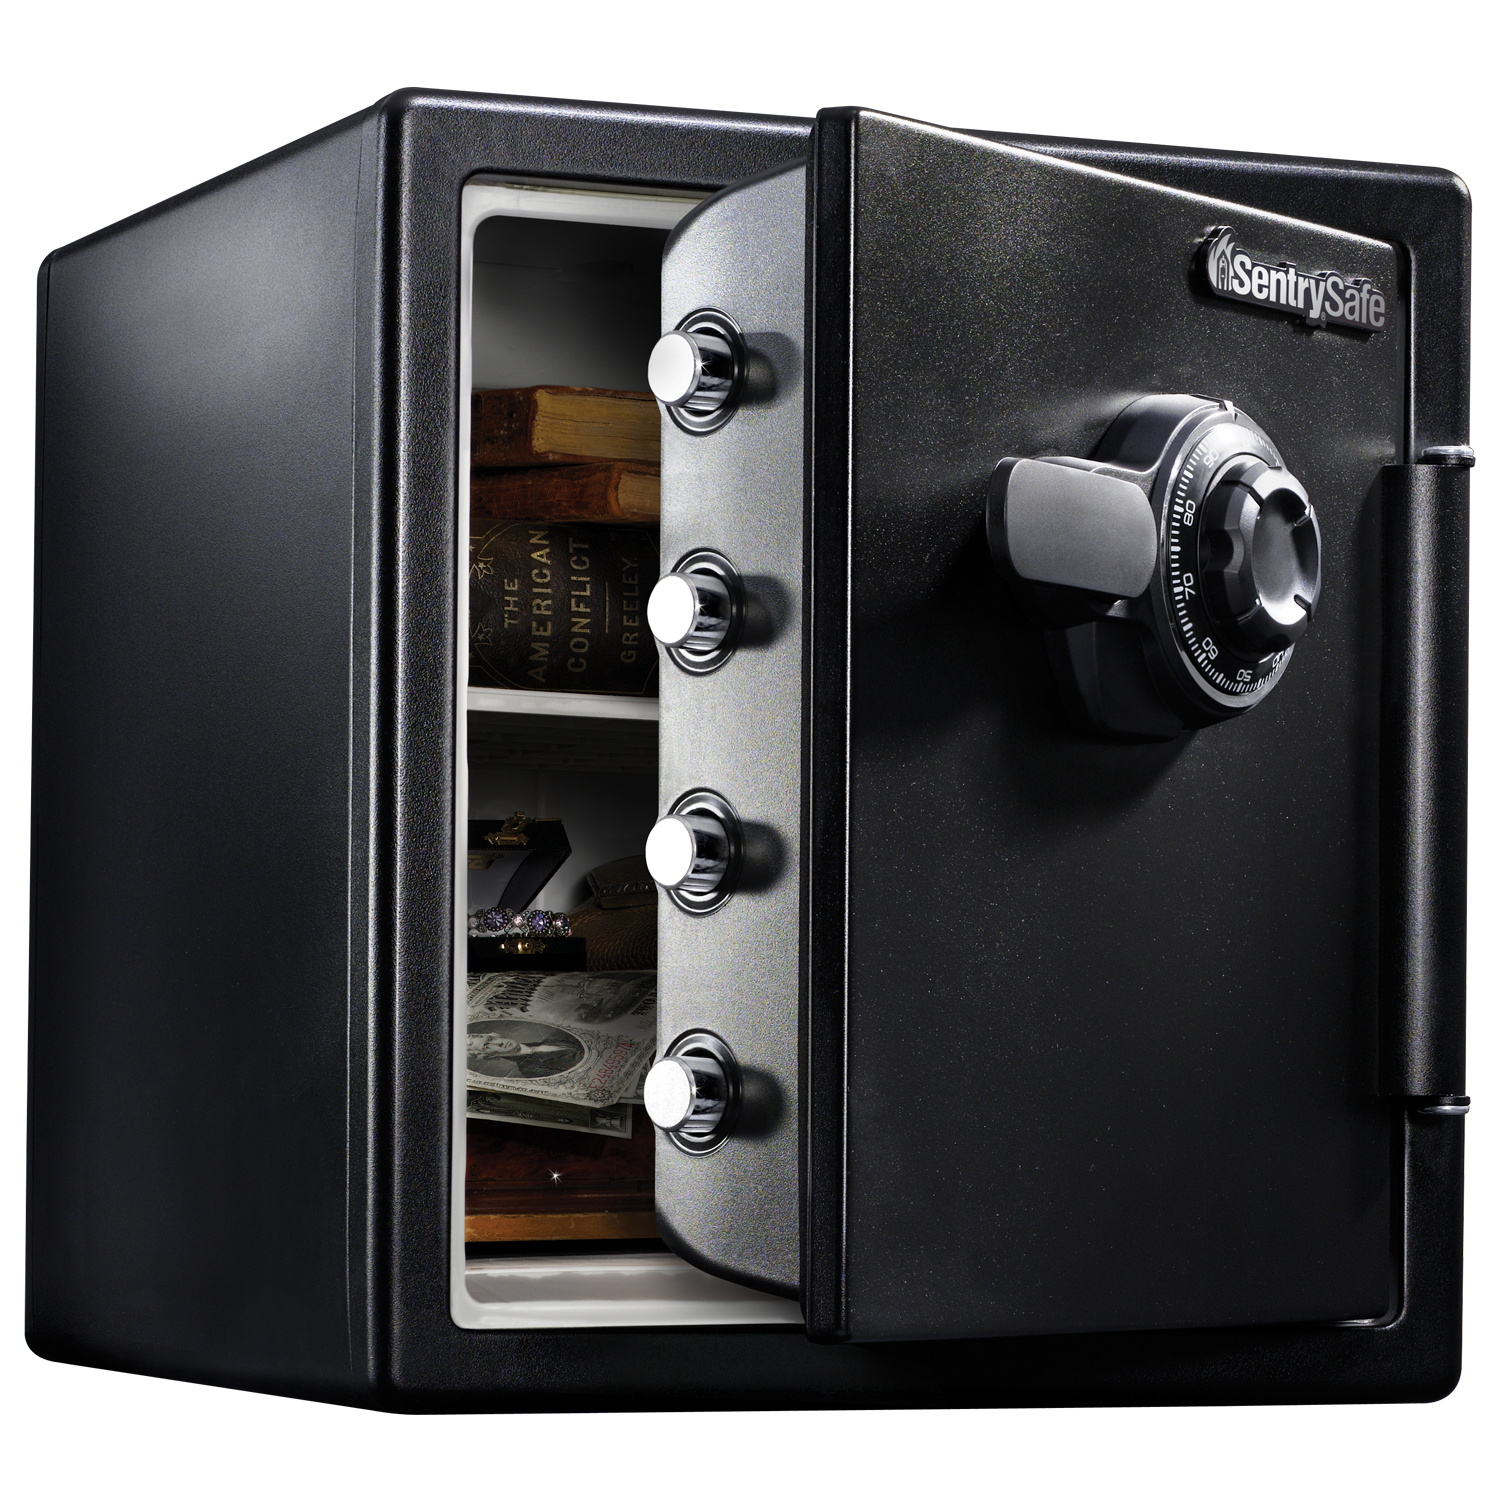 SentrySafe SFW123CS Fire-Resistant Safe and Waterproof Safe with Dial Combination Lock, 1.23 cu. ft. - image 1 of 7